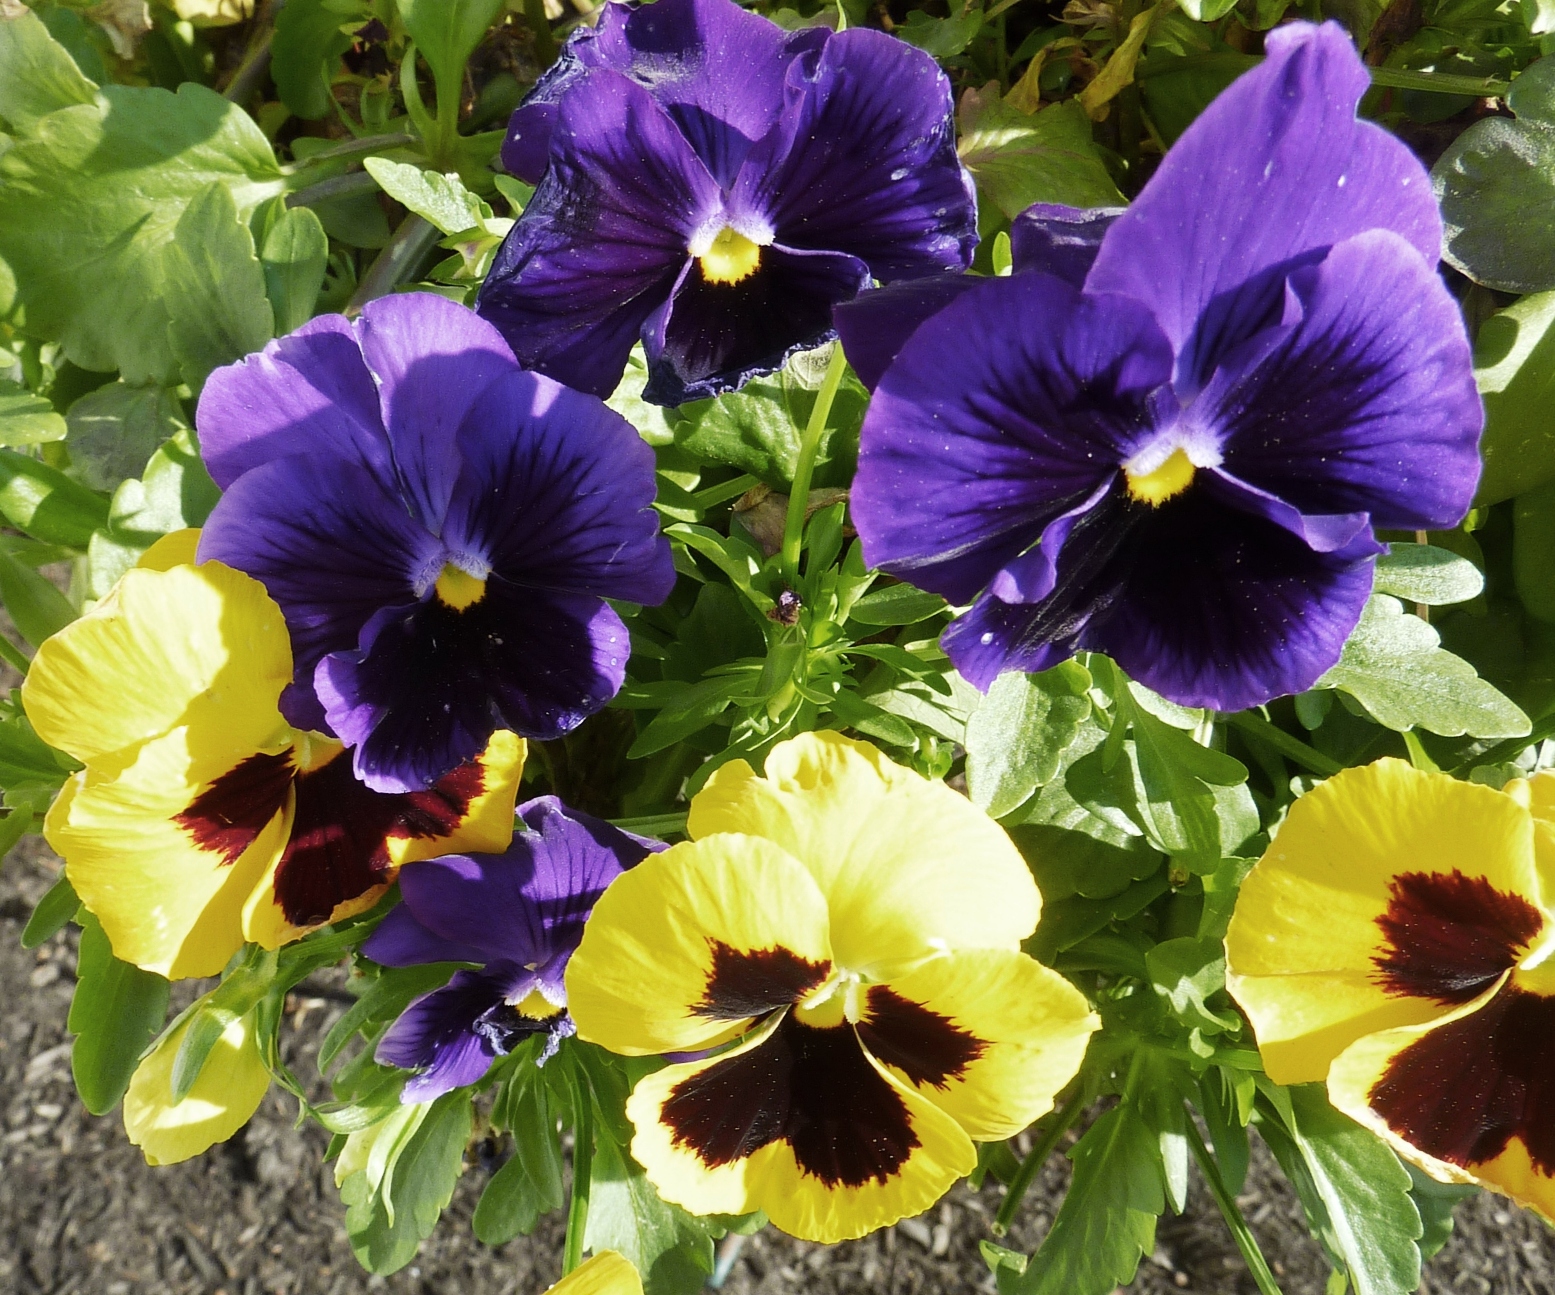 Pretty Pansies (user submitted)